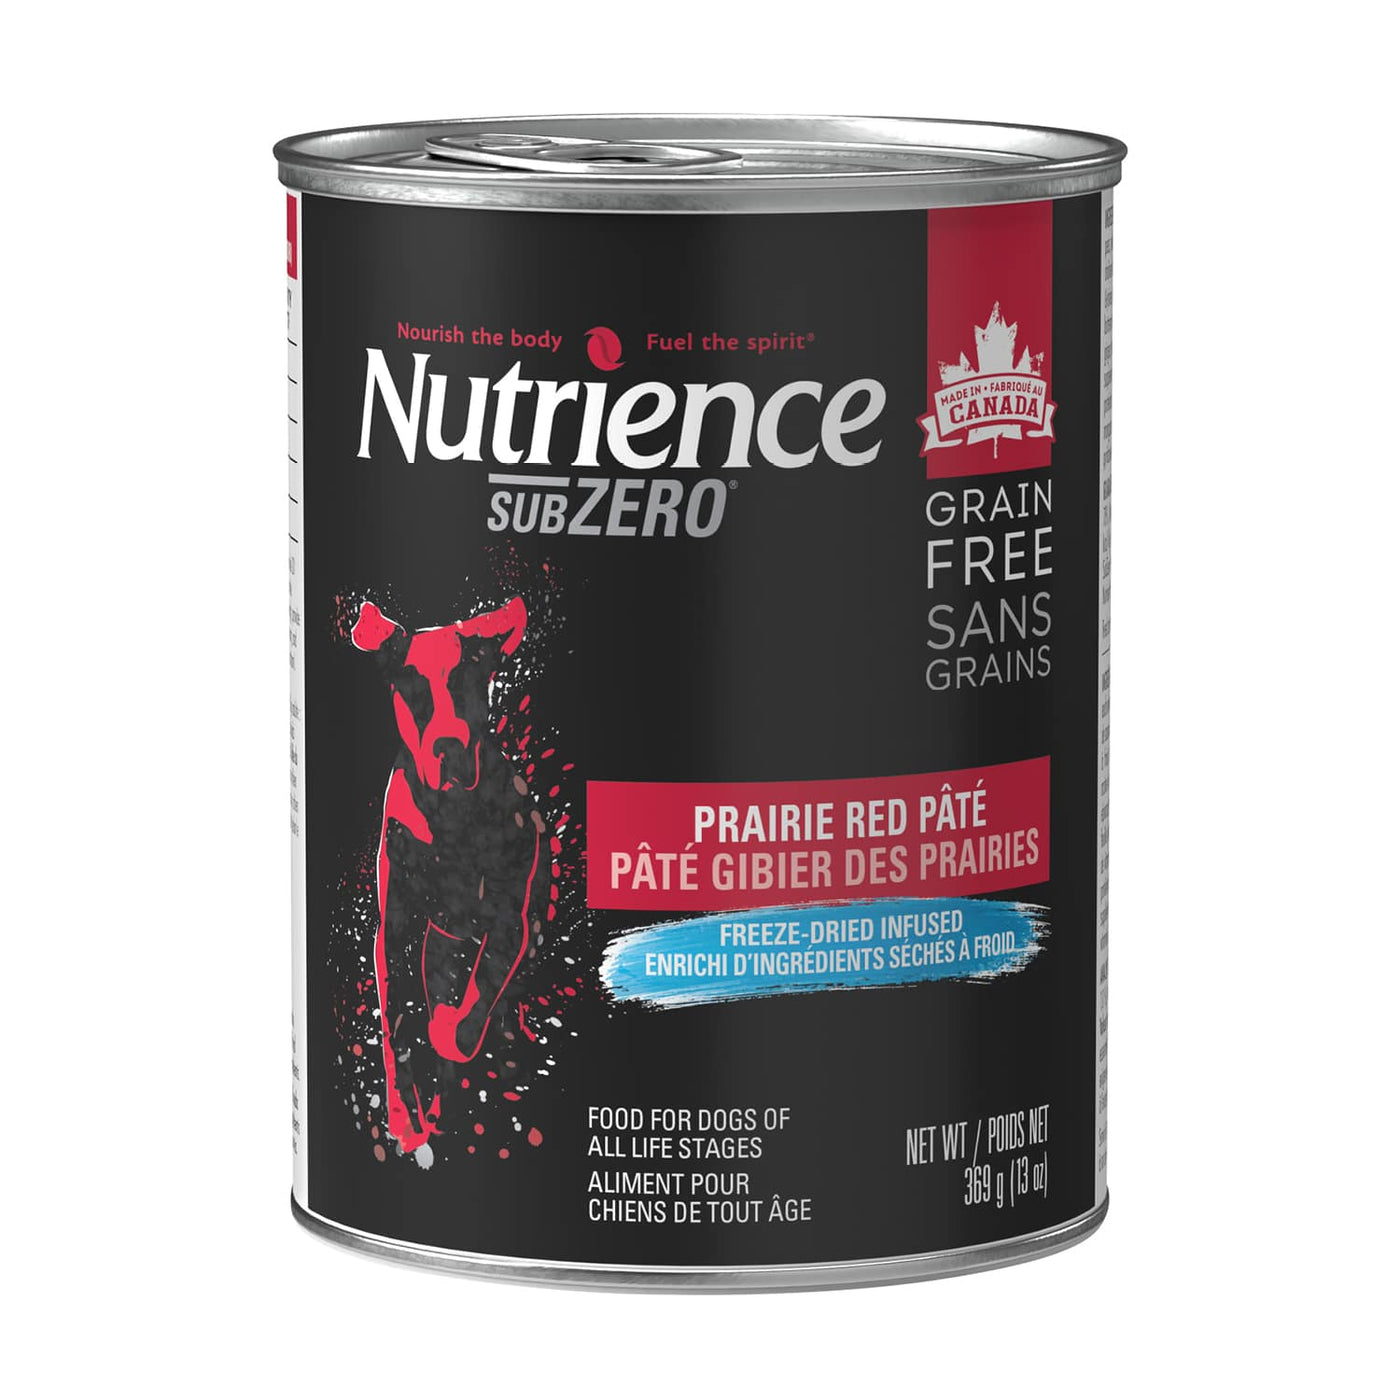 SubZero Prairie Red Pâté – High Protein Food for Dogs - Wet Dog Food - Nutrience